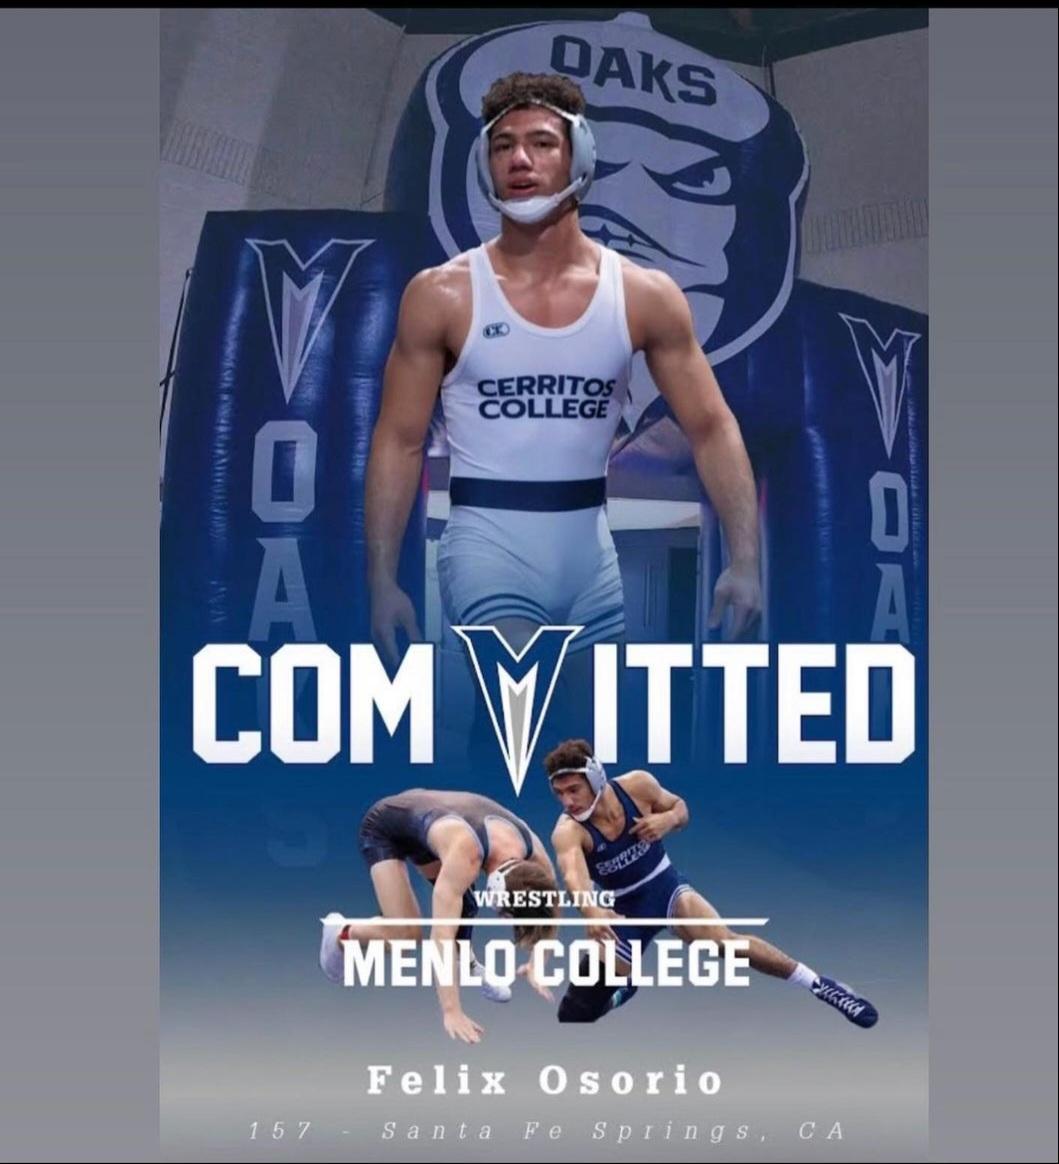 Felix Osorio committed to Menlo College